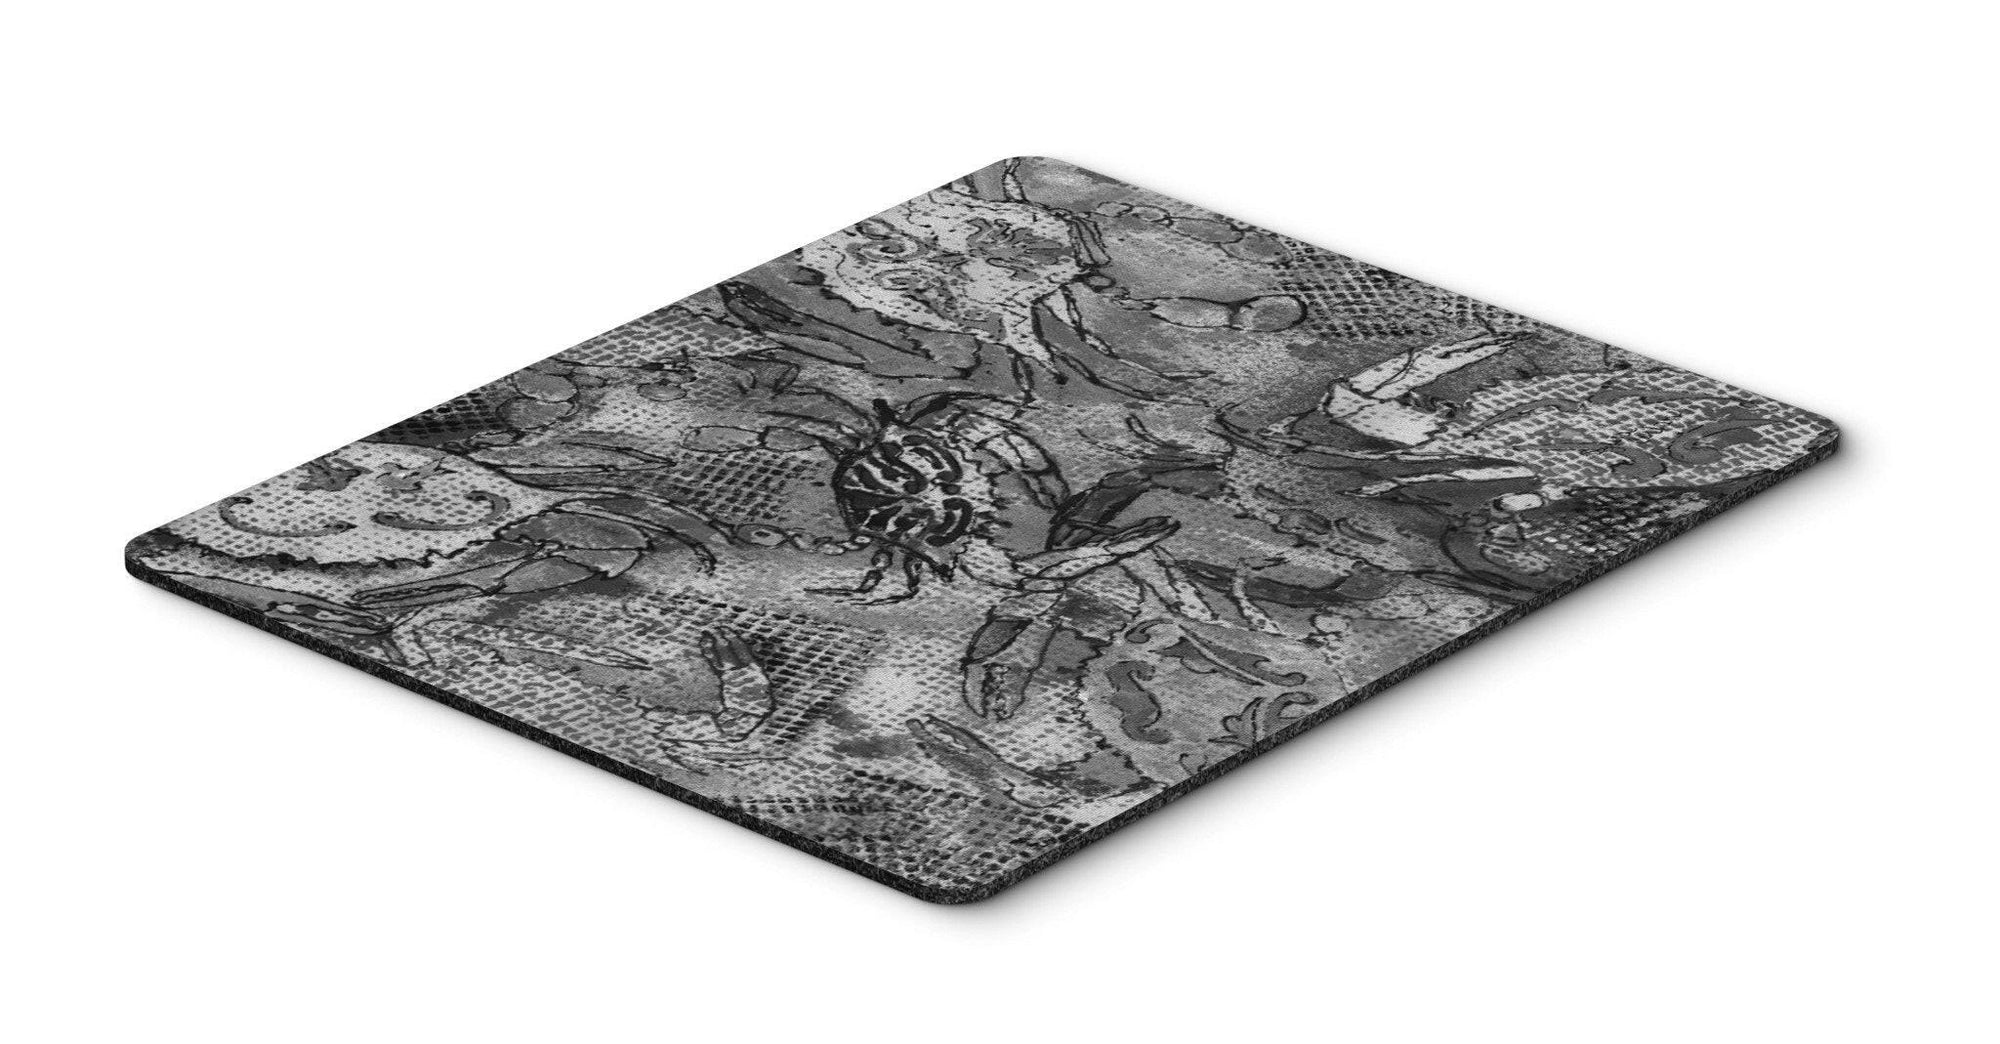 Grey Canvas Abstract Crabs Mouse Pad, Hot Pad or Trivet 8953MP by Caroline's Treasures